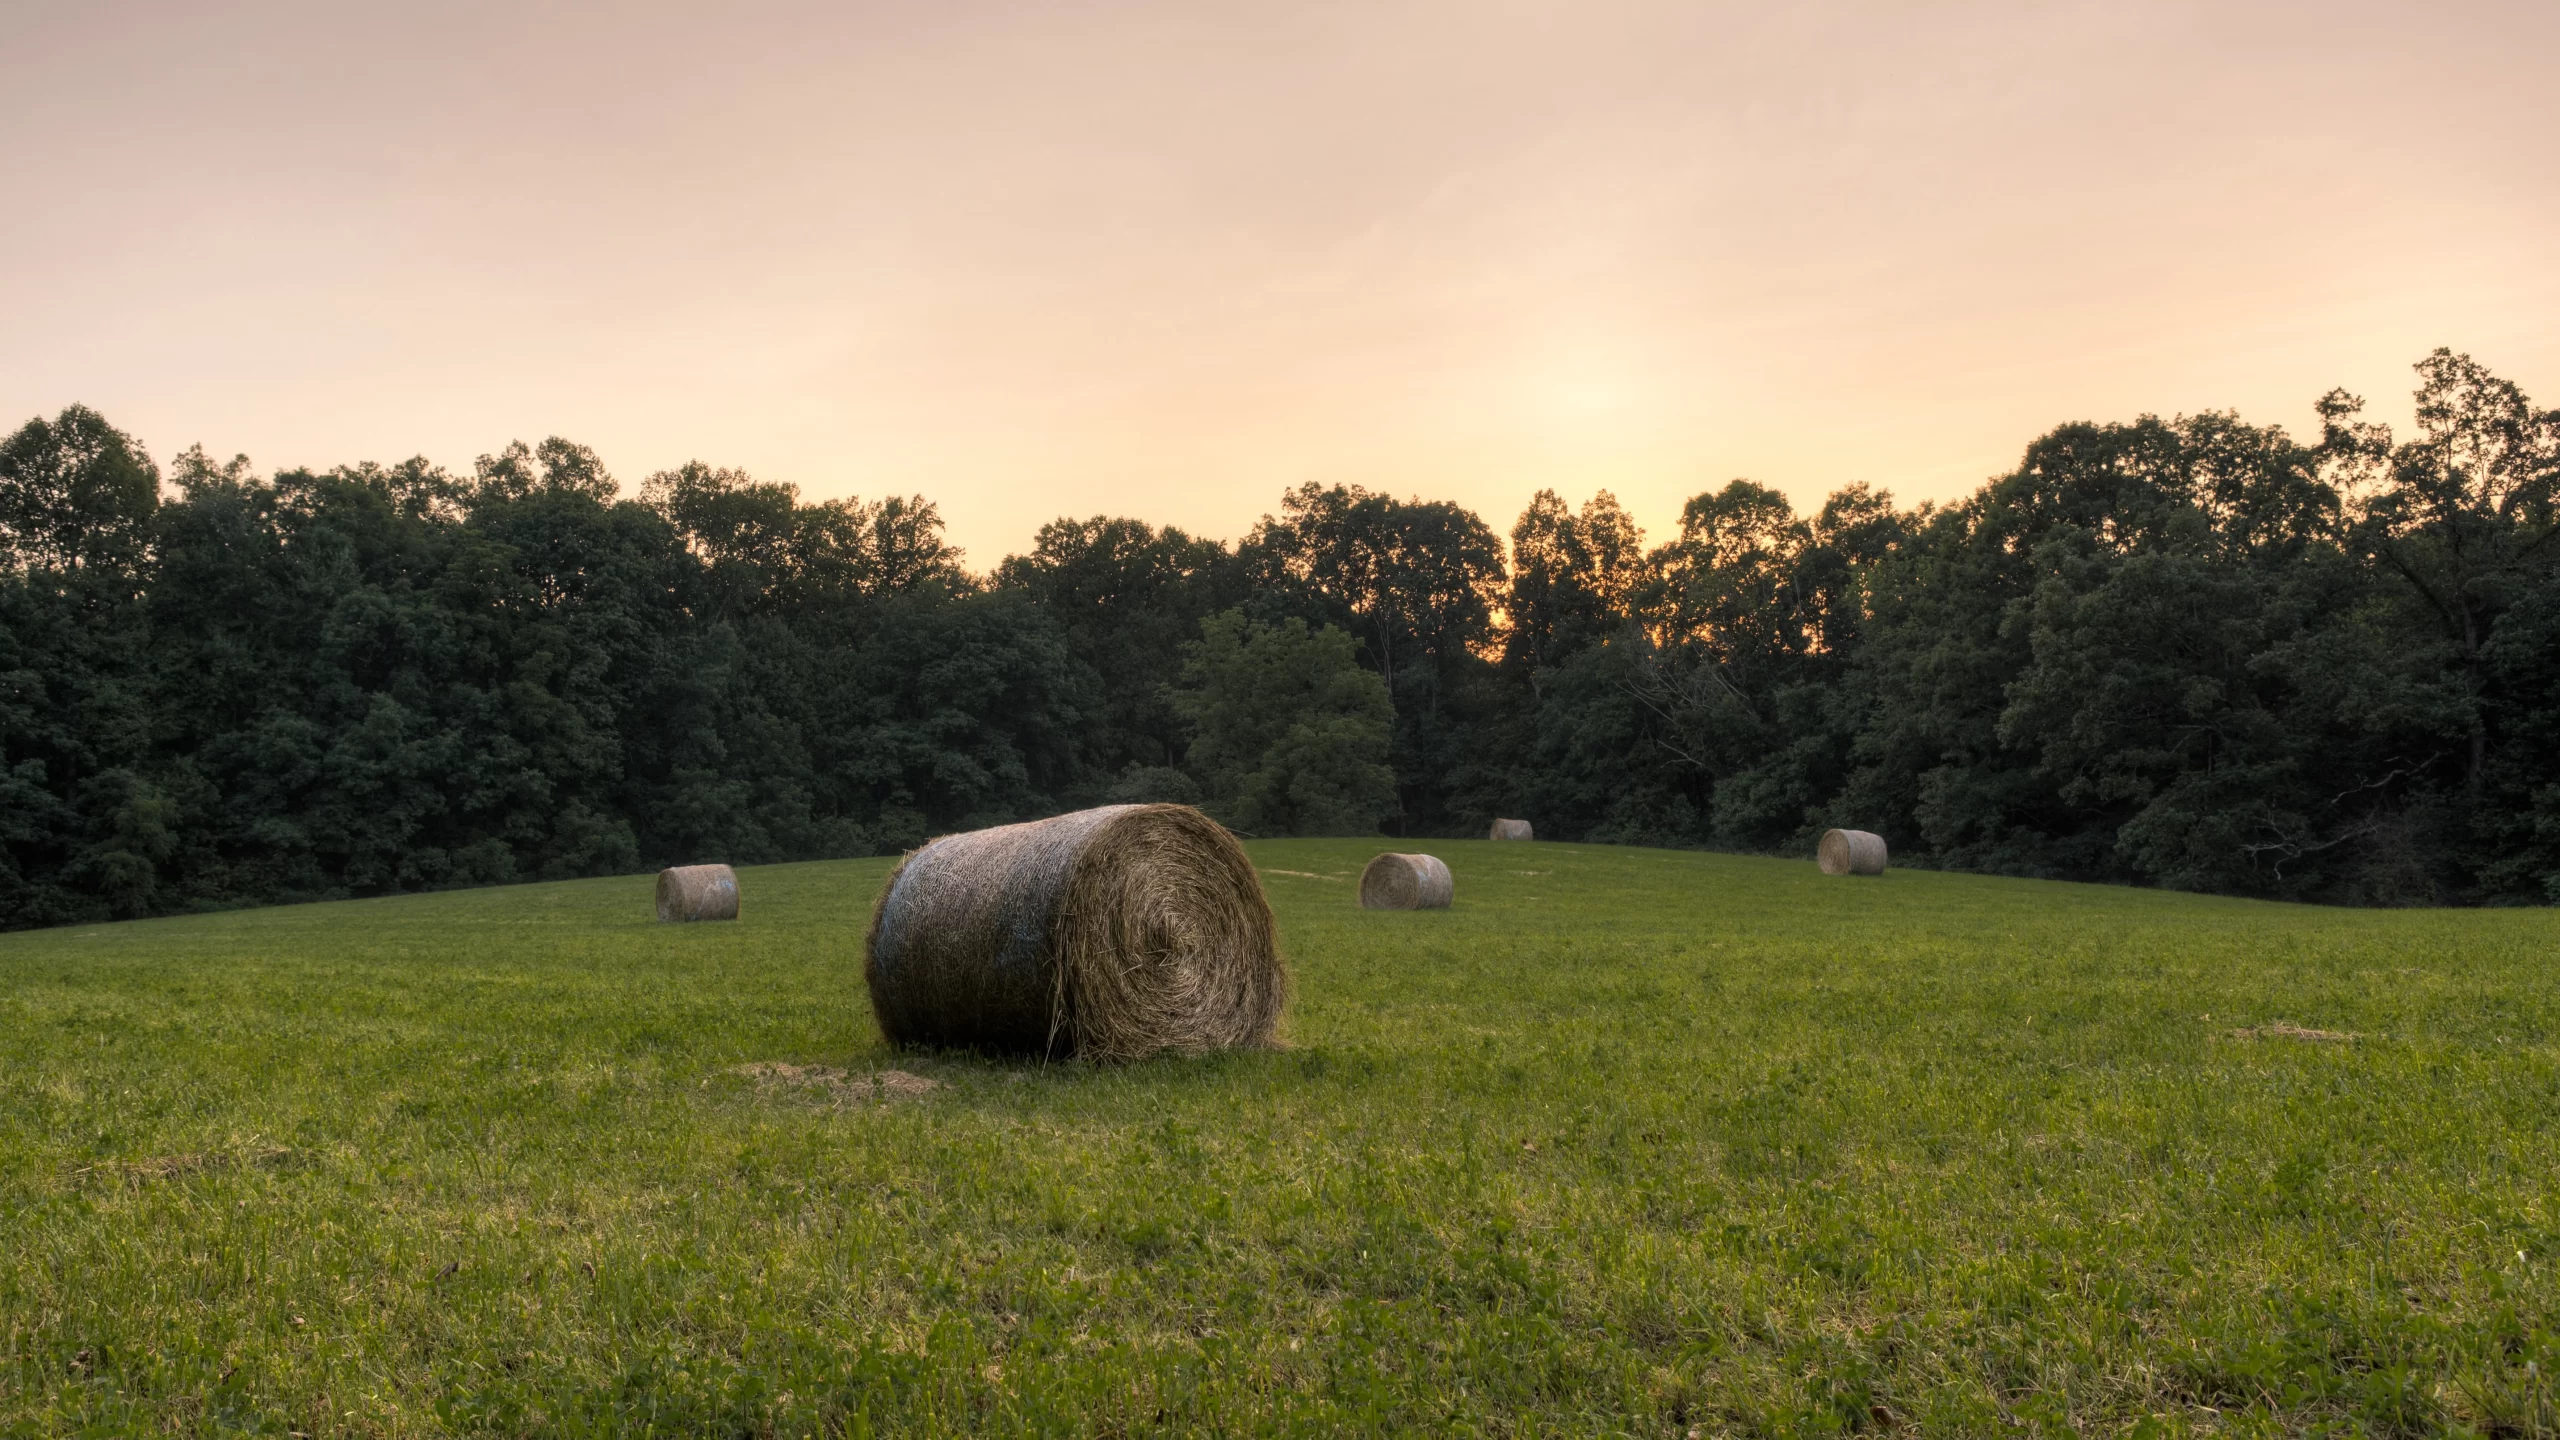 Laurel County, United States Published on April 23, 2018 Canon, EOS 5D Mark III Free to use under the Unsplash License A rural scene in Kentucky featuring some hay bales.